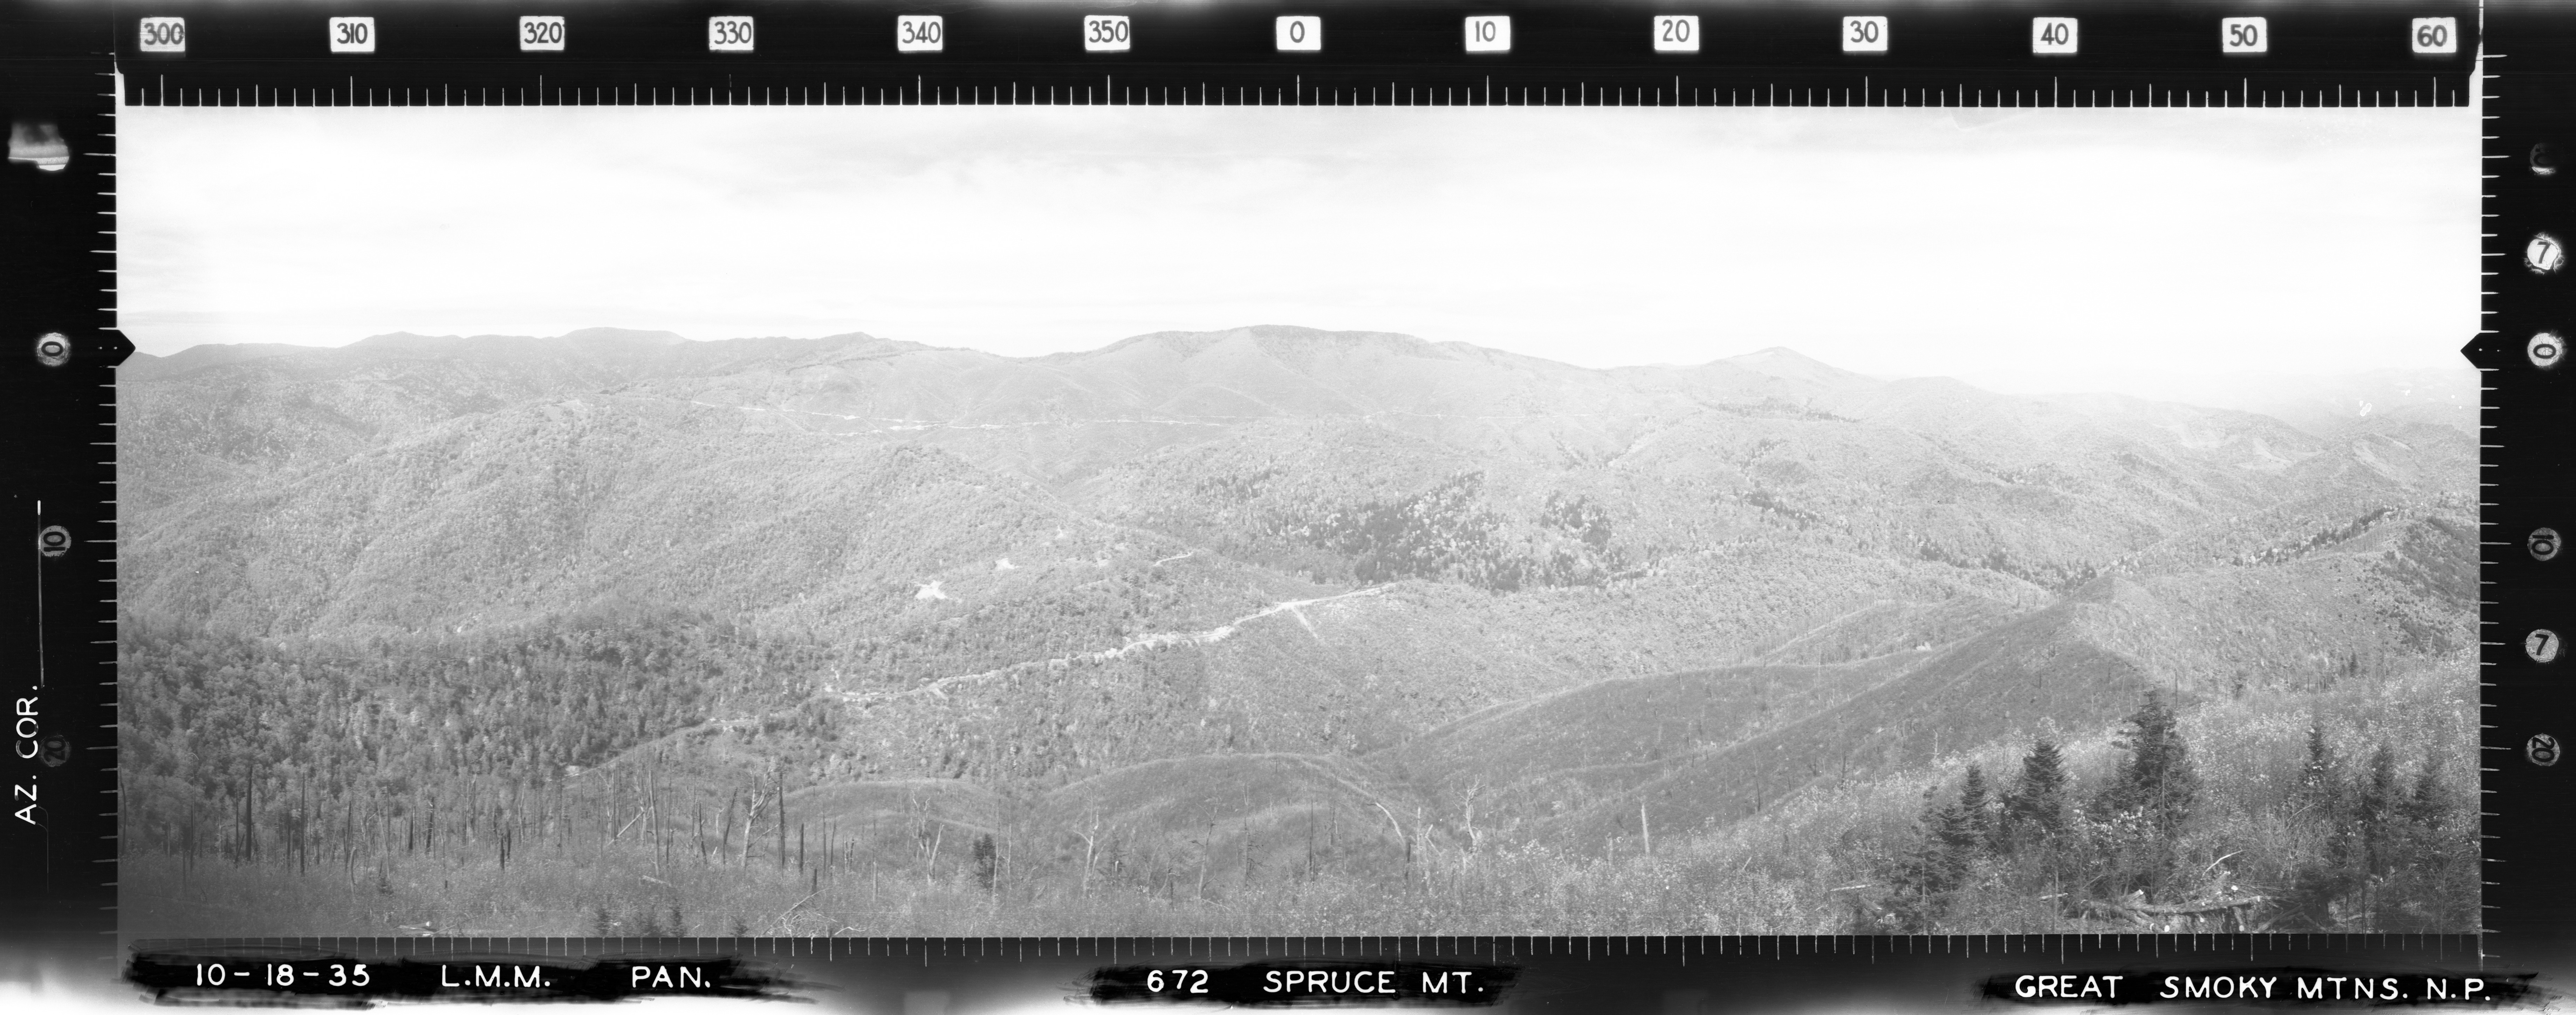 Panoramic view from Spruce Mountain fire lookout station, sector 300-60 degrees, North Carolina, 1935 Great Smoky Mountains National Park - by Lester Moe